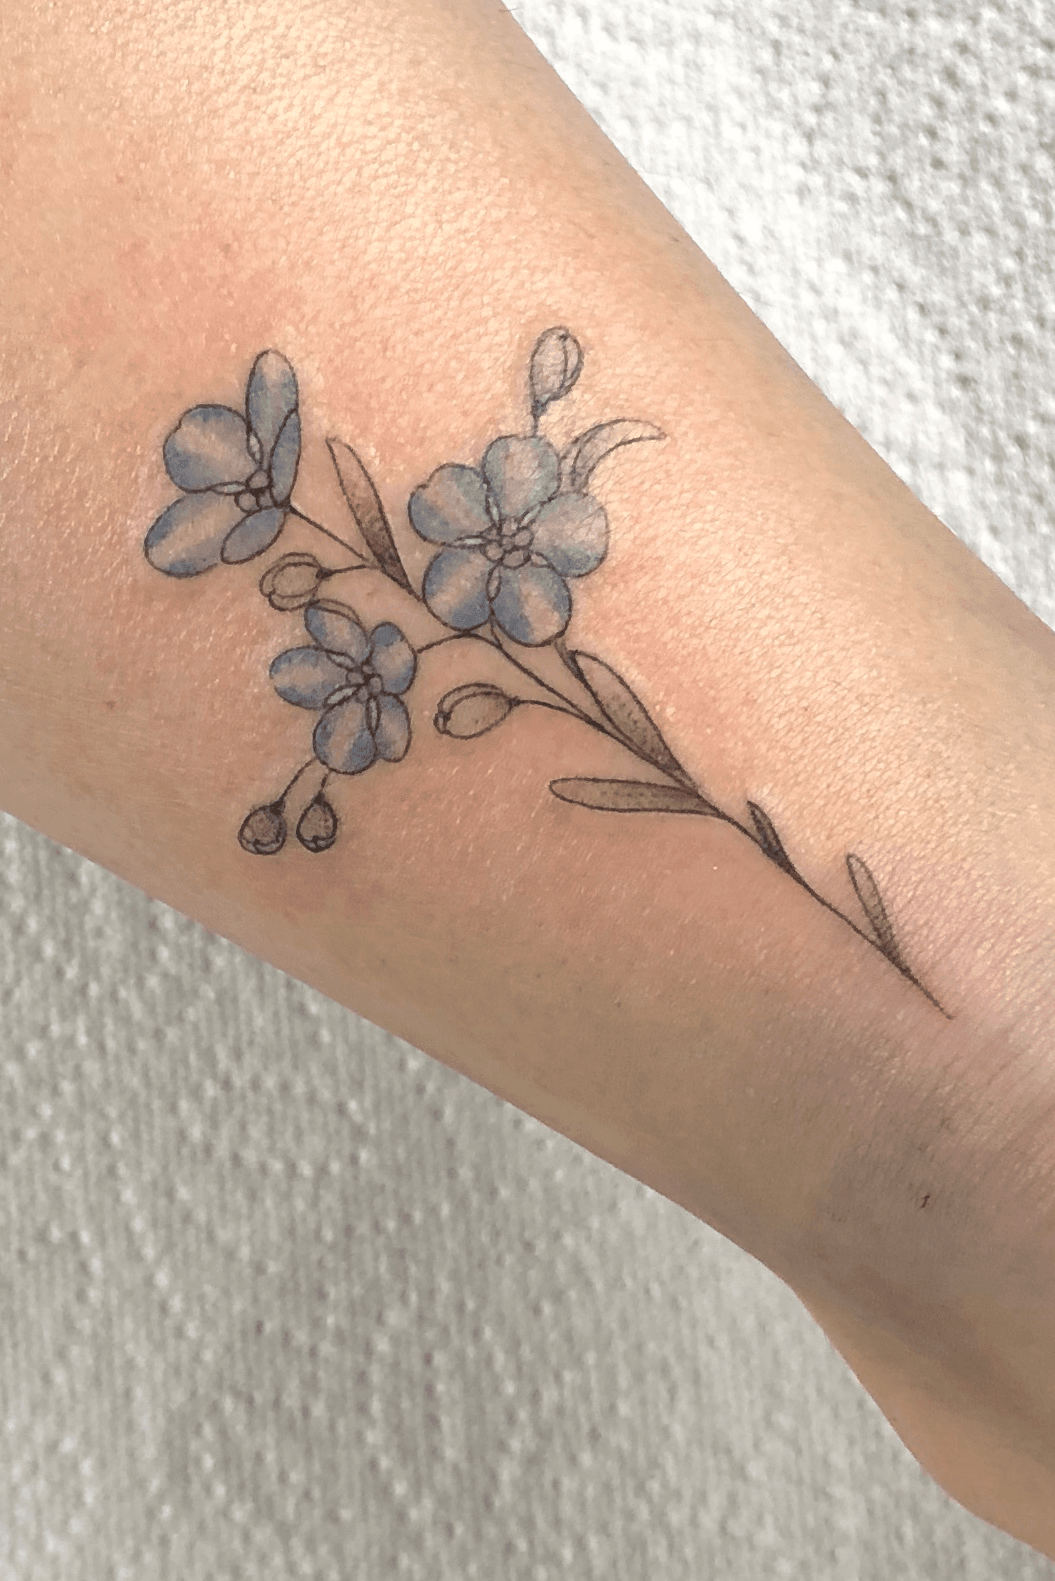 Tattoo Uploaded By Melissa De Ridder Fine Line Art Forget Me Not Flowers In The Shape Of A Cross Fineline Cross Flowers Forgetmenot Tattoodo